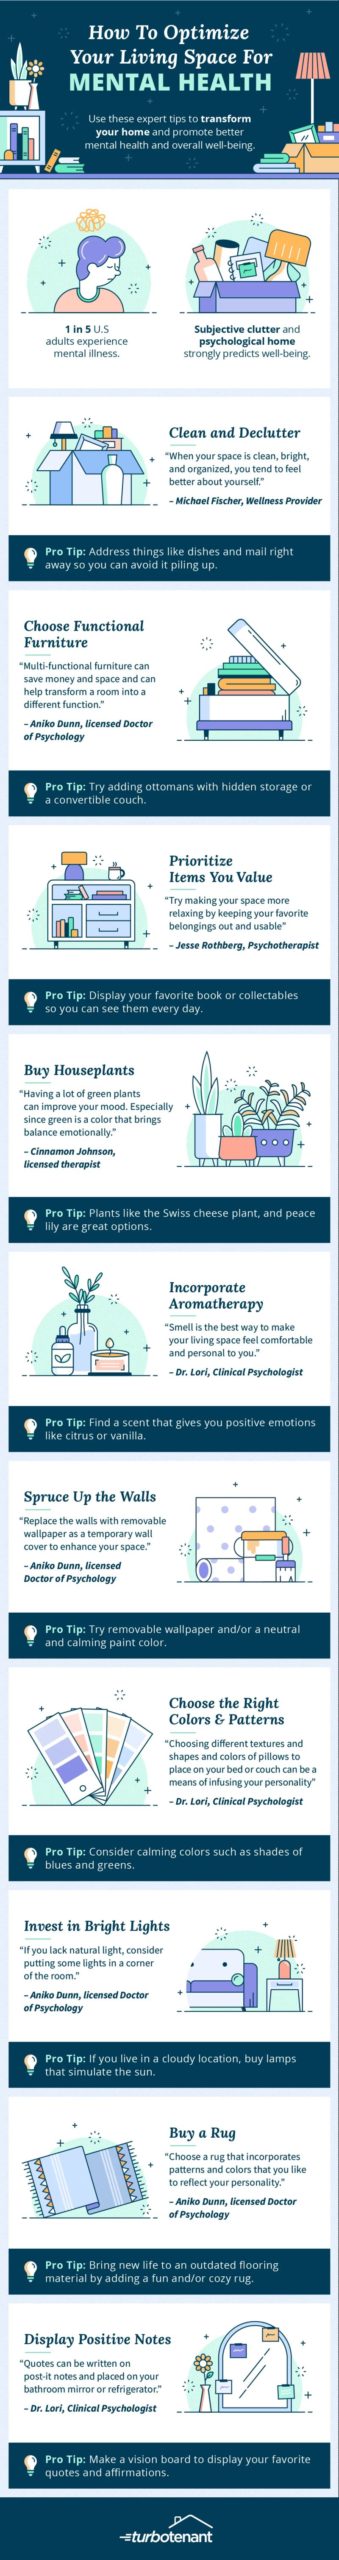 How to Optimize Your Home for Mental Health